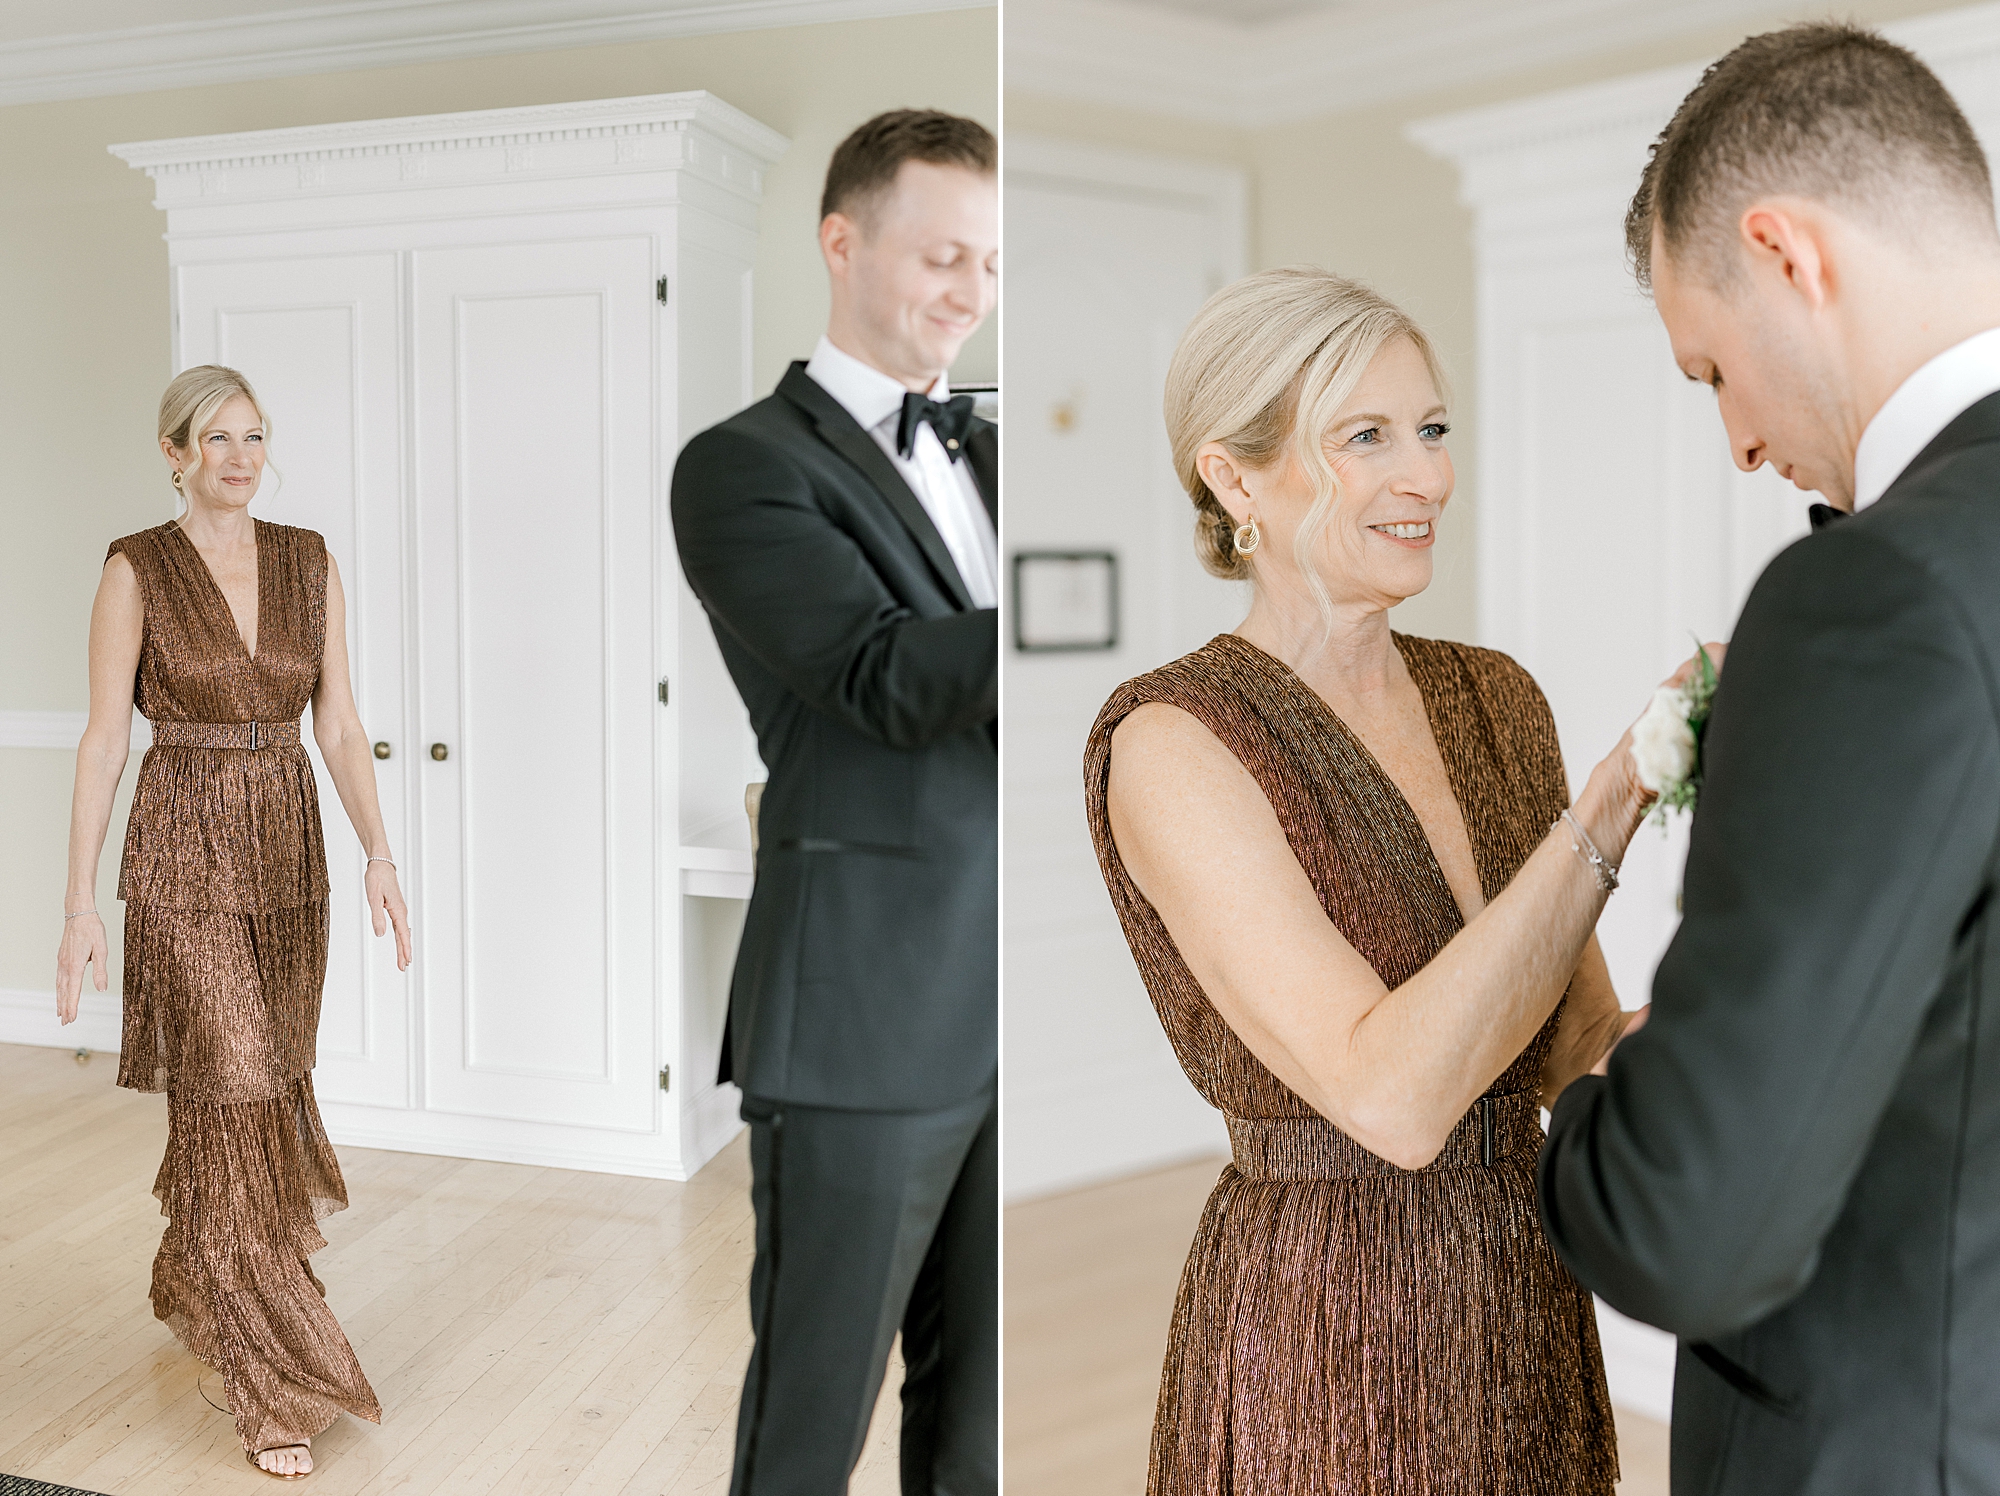 mother of the groom puts on boutonnière for him